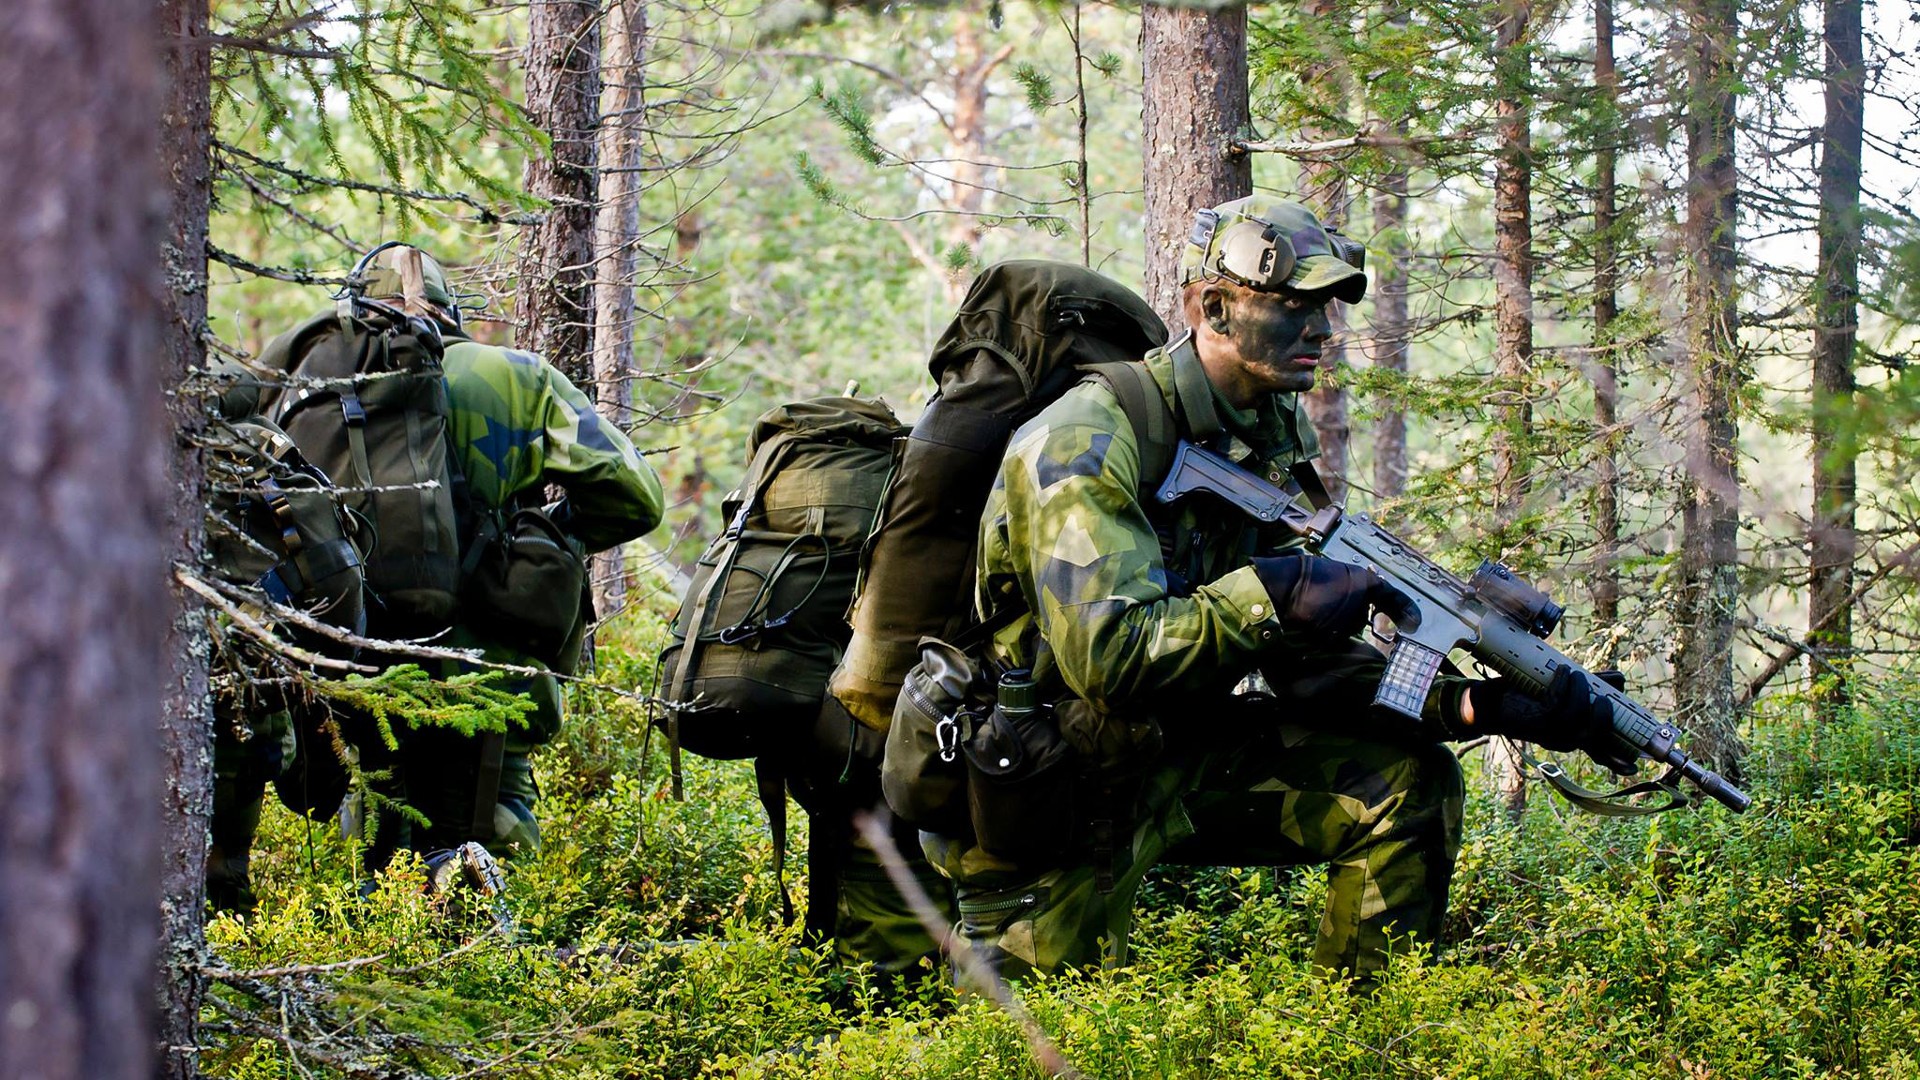 General 1920x1080 military soldier forest Swedish Army AK-5C assault rifle